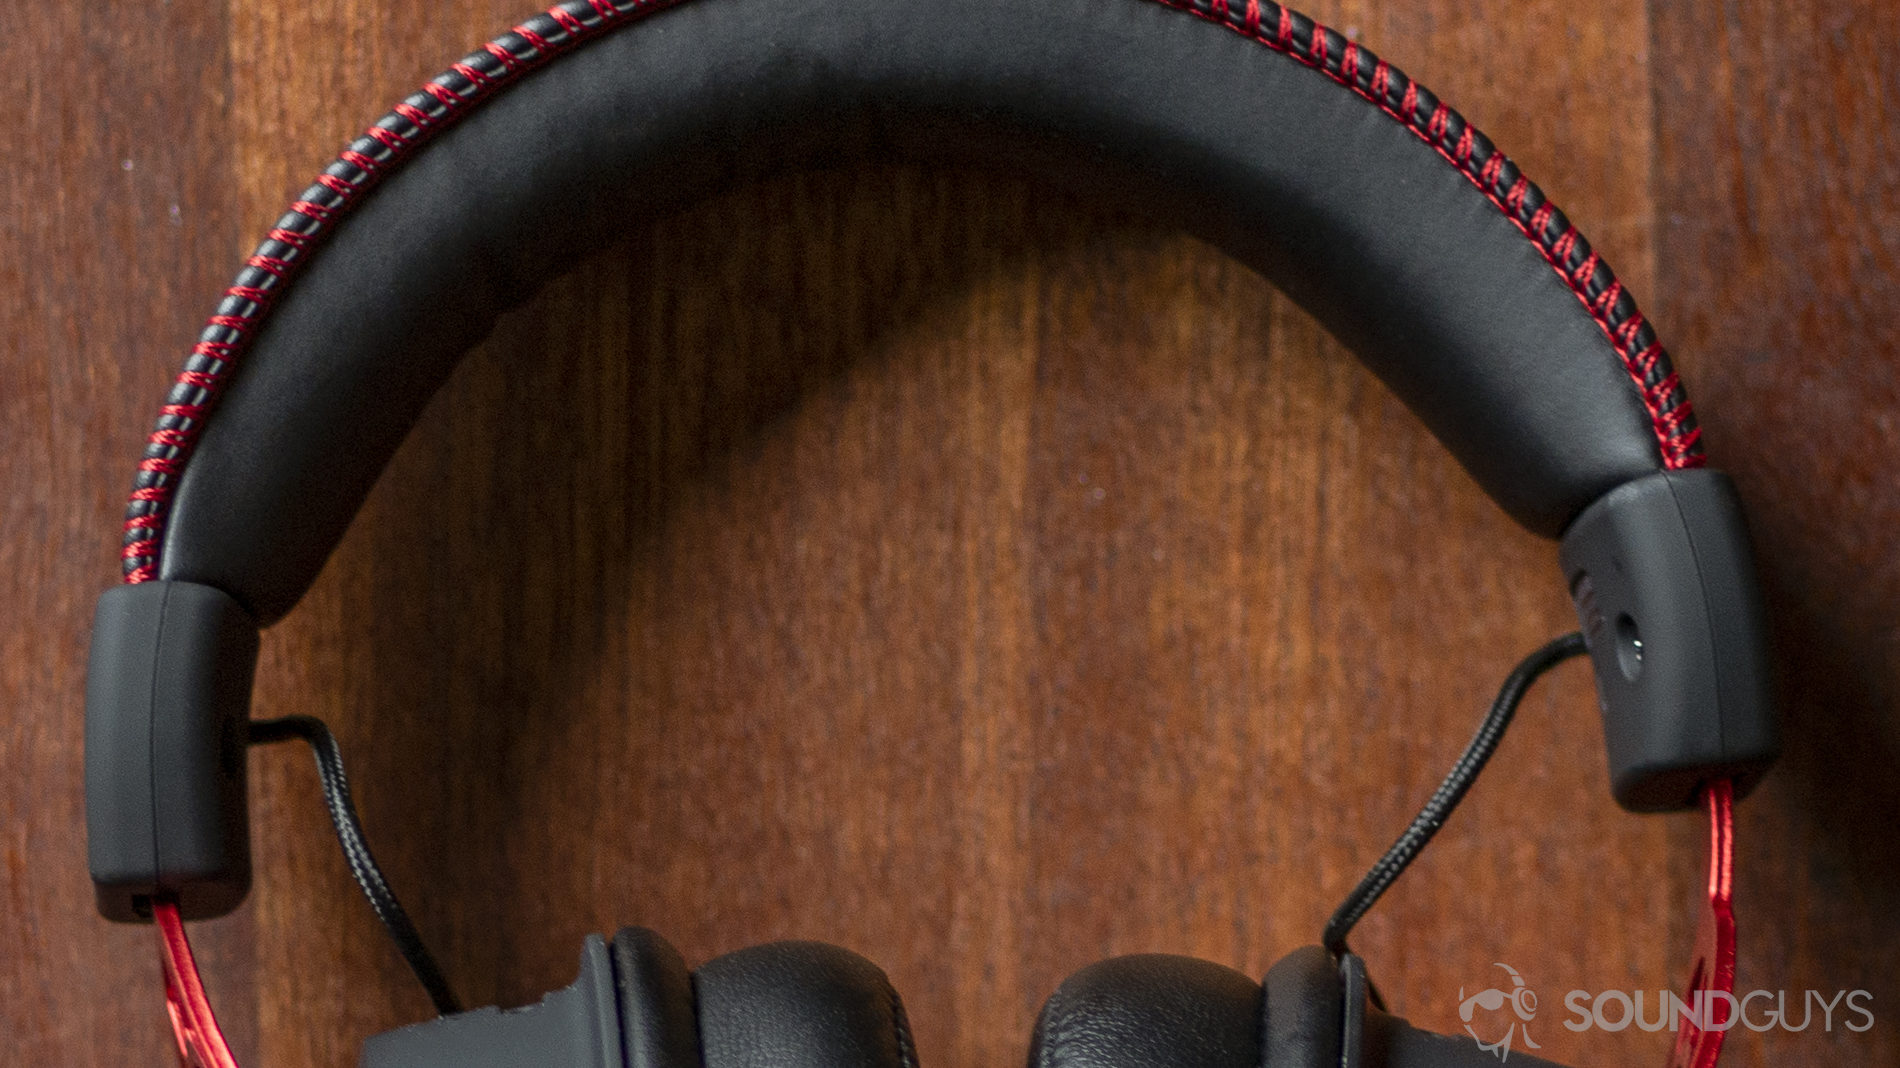 The HyperX Cloud Alpha lays on a wooden table, with the focus on its headband.